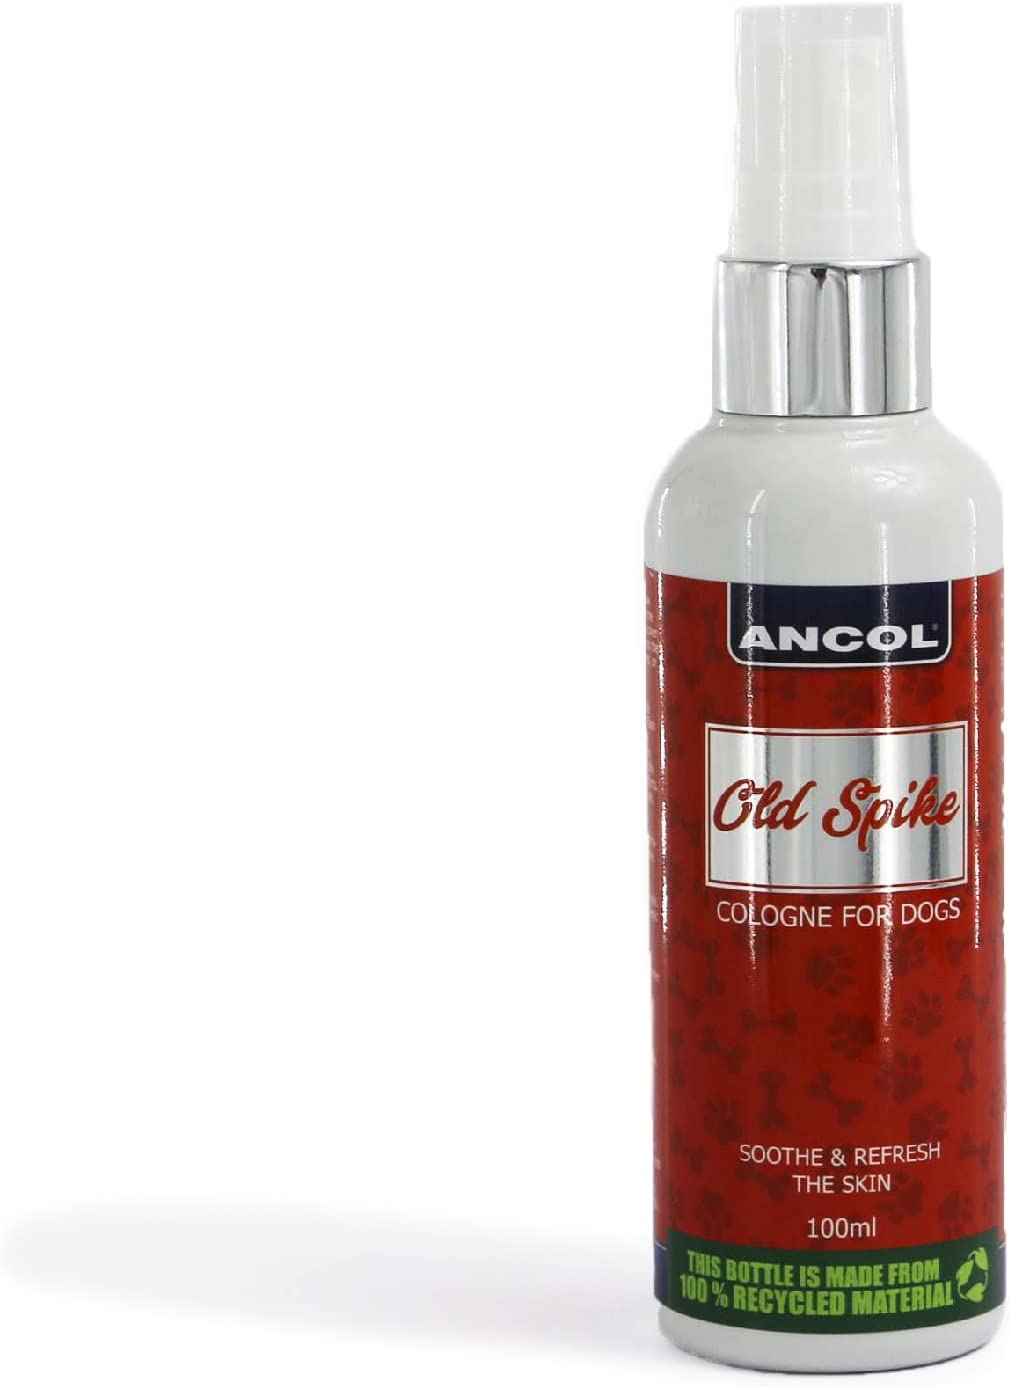 Ancol Old Spike Dog Grooming Cologne 100ml